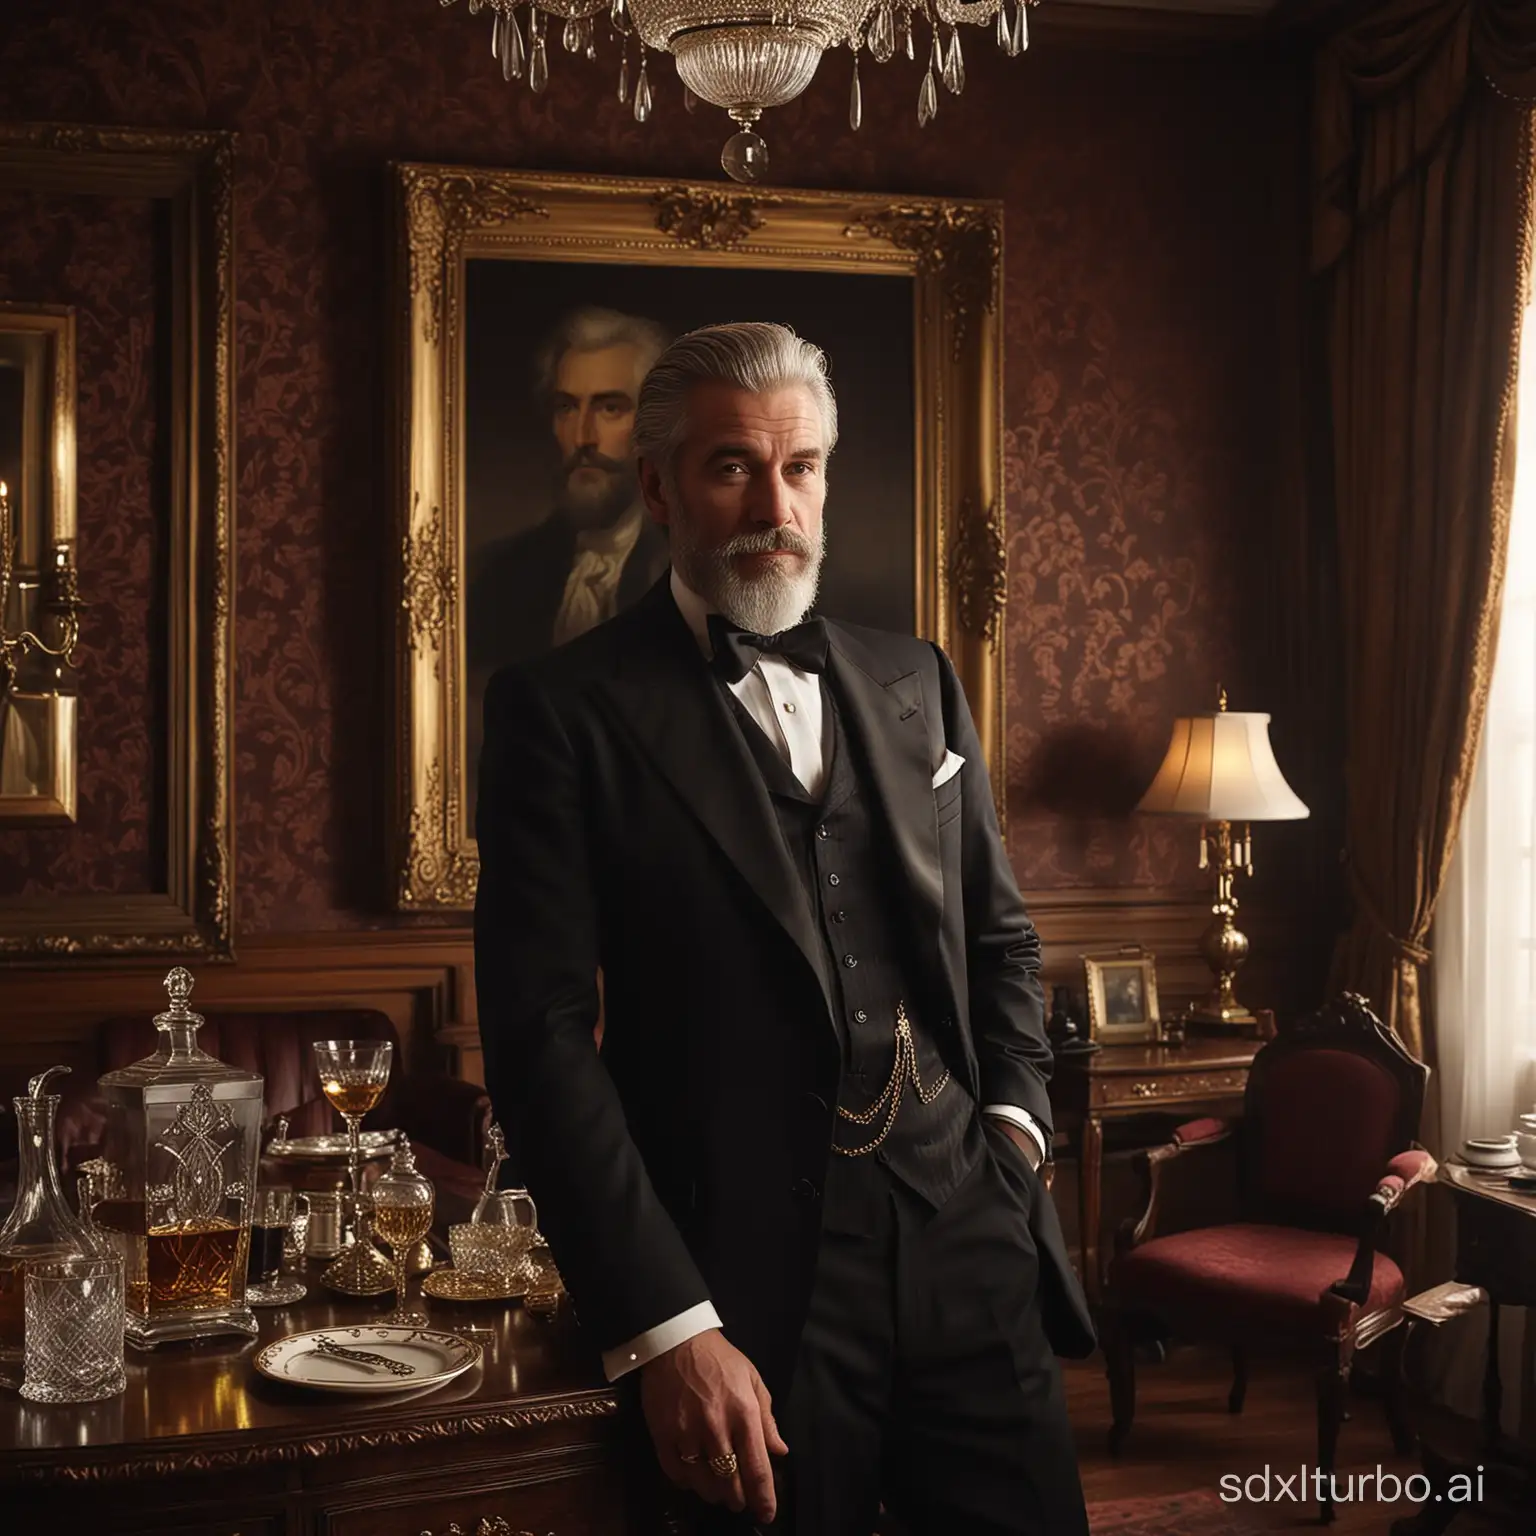 "Generate a photo-realistic image depicting a cinematic scene that centers on the face of a wealthy man, exuding an aura of affluence and sophistication. The scene is set in an opulent, dimly lit room that whispers luxury through its rich, dark wood paneling and plush, velvet draperies in deep burgundy. Soft, ambient lighting casts a warm glow, highlighting the intricate details of the lavish furnishings, including a crystal decanter of aged scotch and an antique, gold-framed painting of a majestic landscape on the wall. The man's face is at the forefront, captured in a close-up shot that emphasizes his confident, serene expression. He is in his late 50s, with meticulously groomed silver hair and a neatly trimmed beard that speaks of careful, personal attention. His eyes, sharp and discerning, hold a hint of a smile, suggesting a man who is comfortable in his wealth but does not flaunt it. He wears a tailored, dark suit of the finest fabric, subtly hinting at his status, and a vintage gold watch peeks from under his cuff, its gleam catching the light. The overall composition conveys a narrative of a man who has risen to the pinnacle of success, surrounded by the trappings of his achievements yet remaining grounded and introspective.